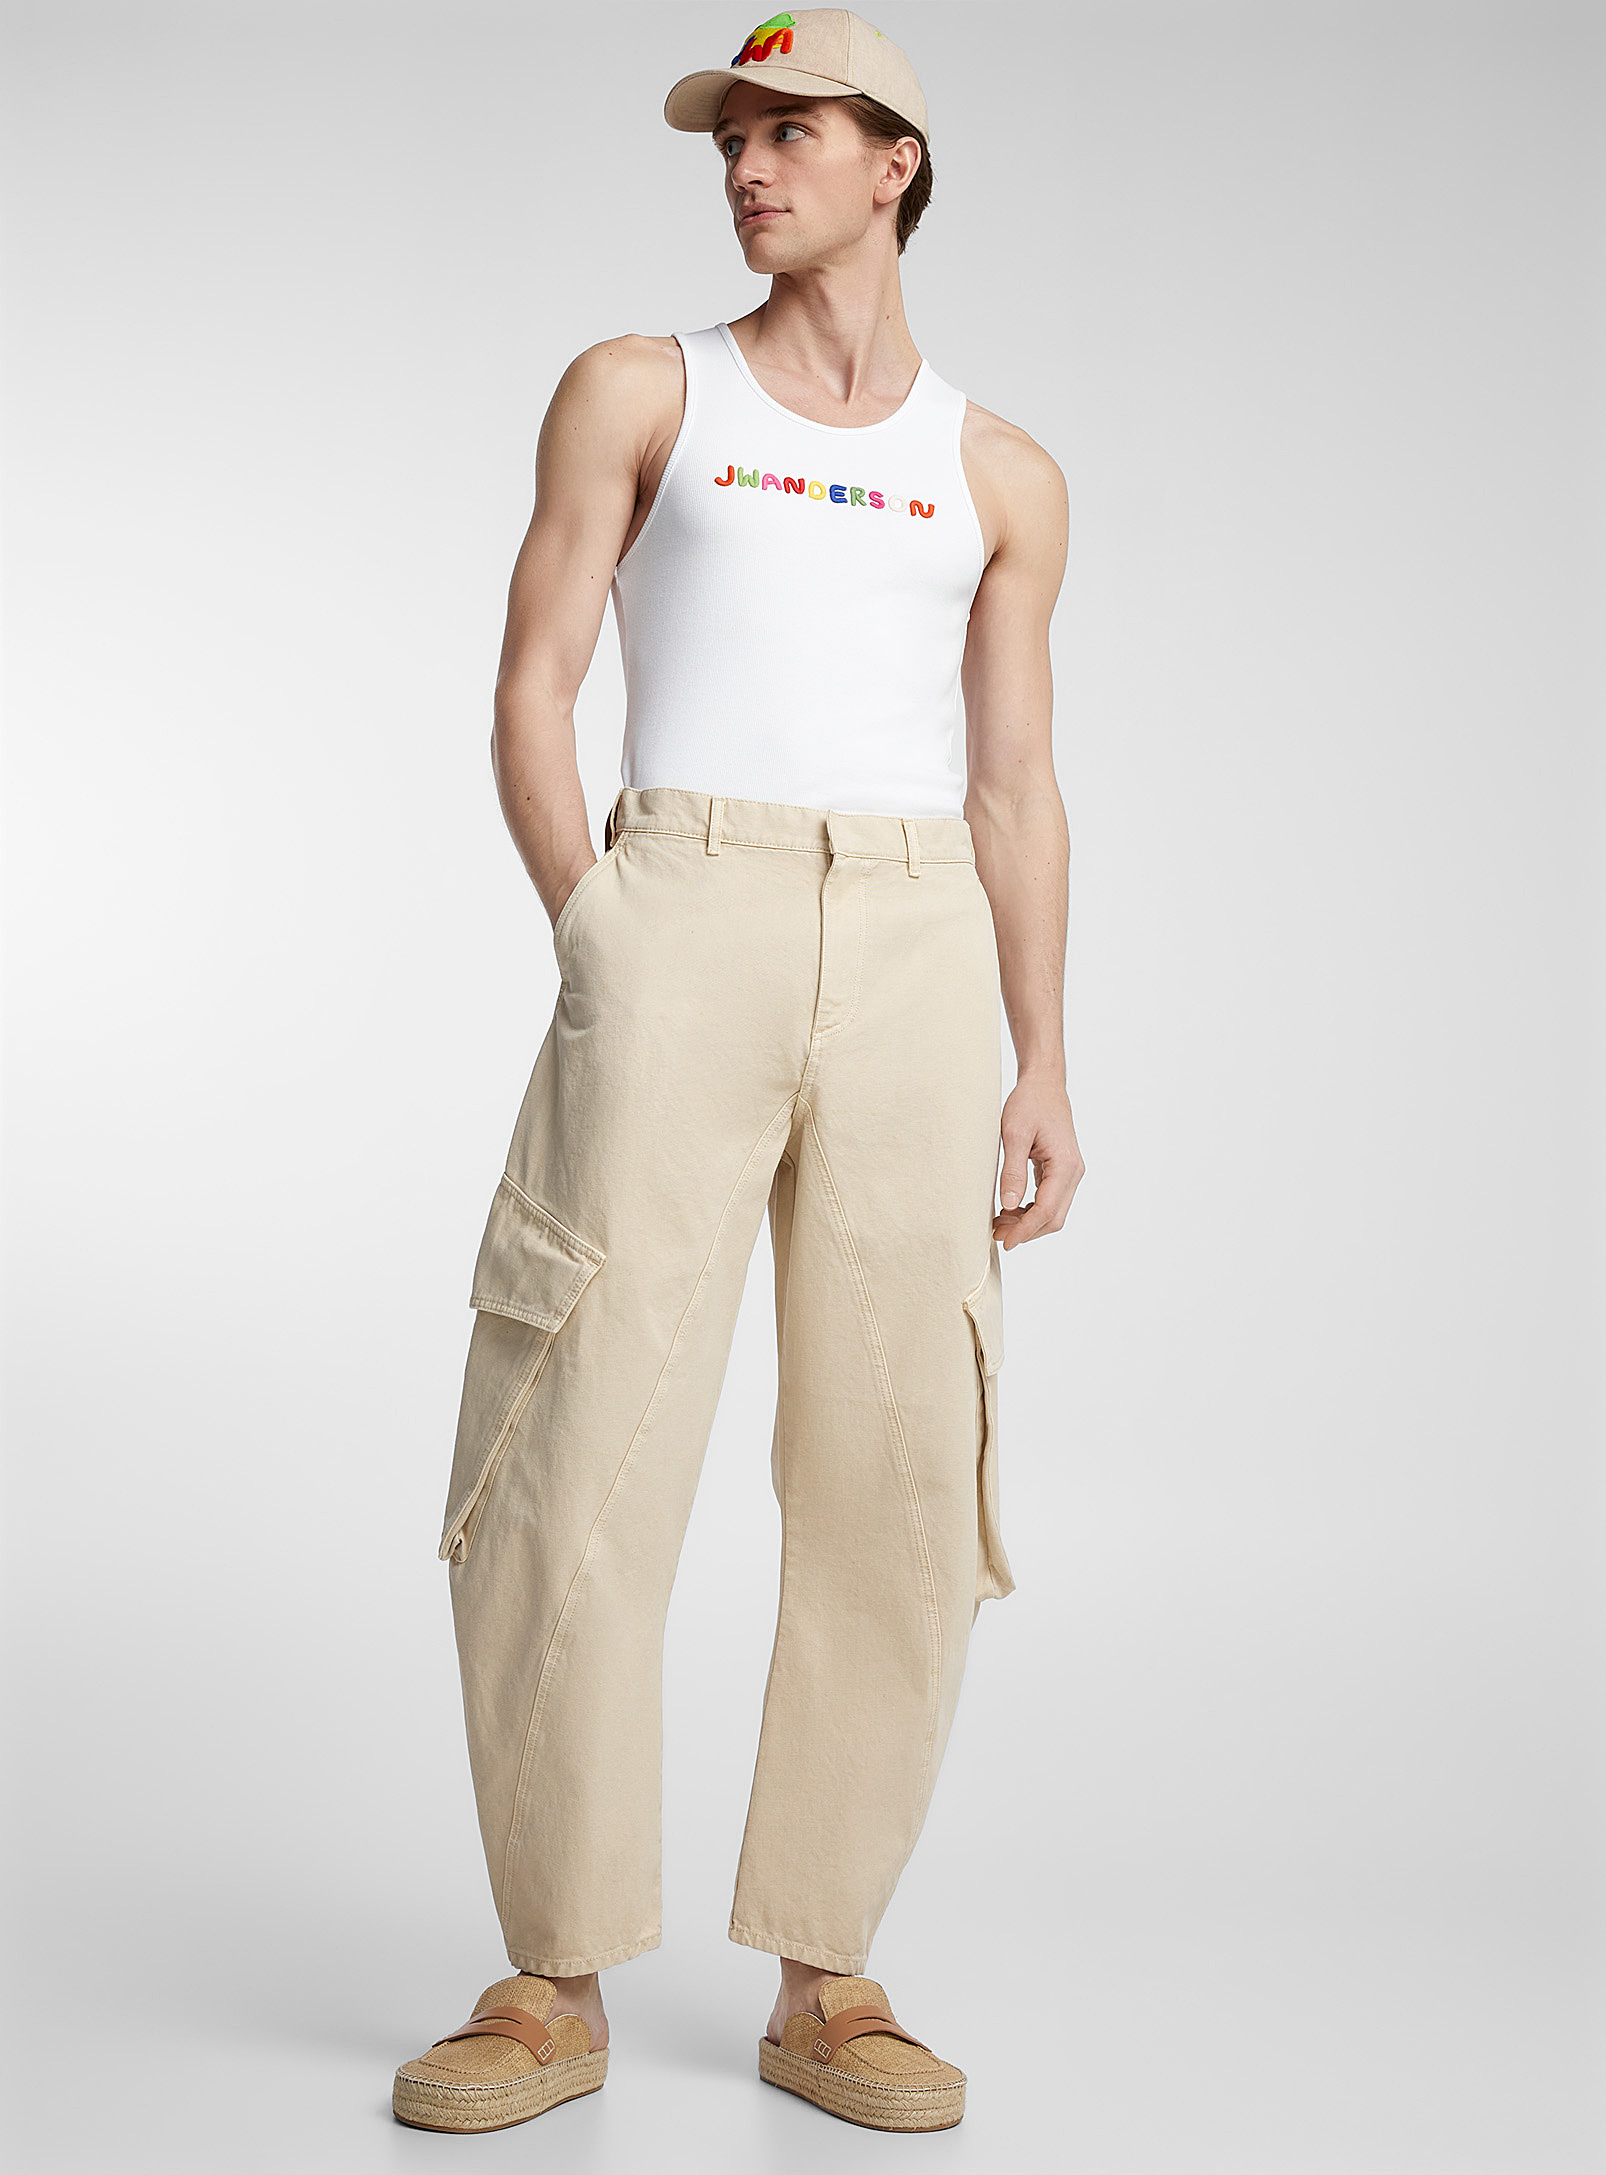 JW Anderson - Men's Twisted cargo pant